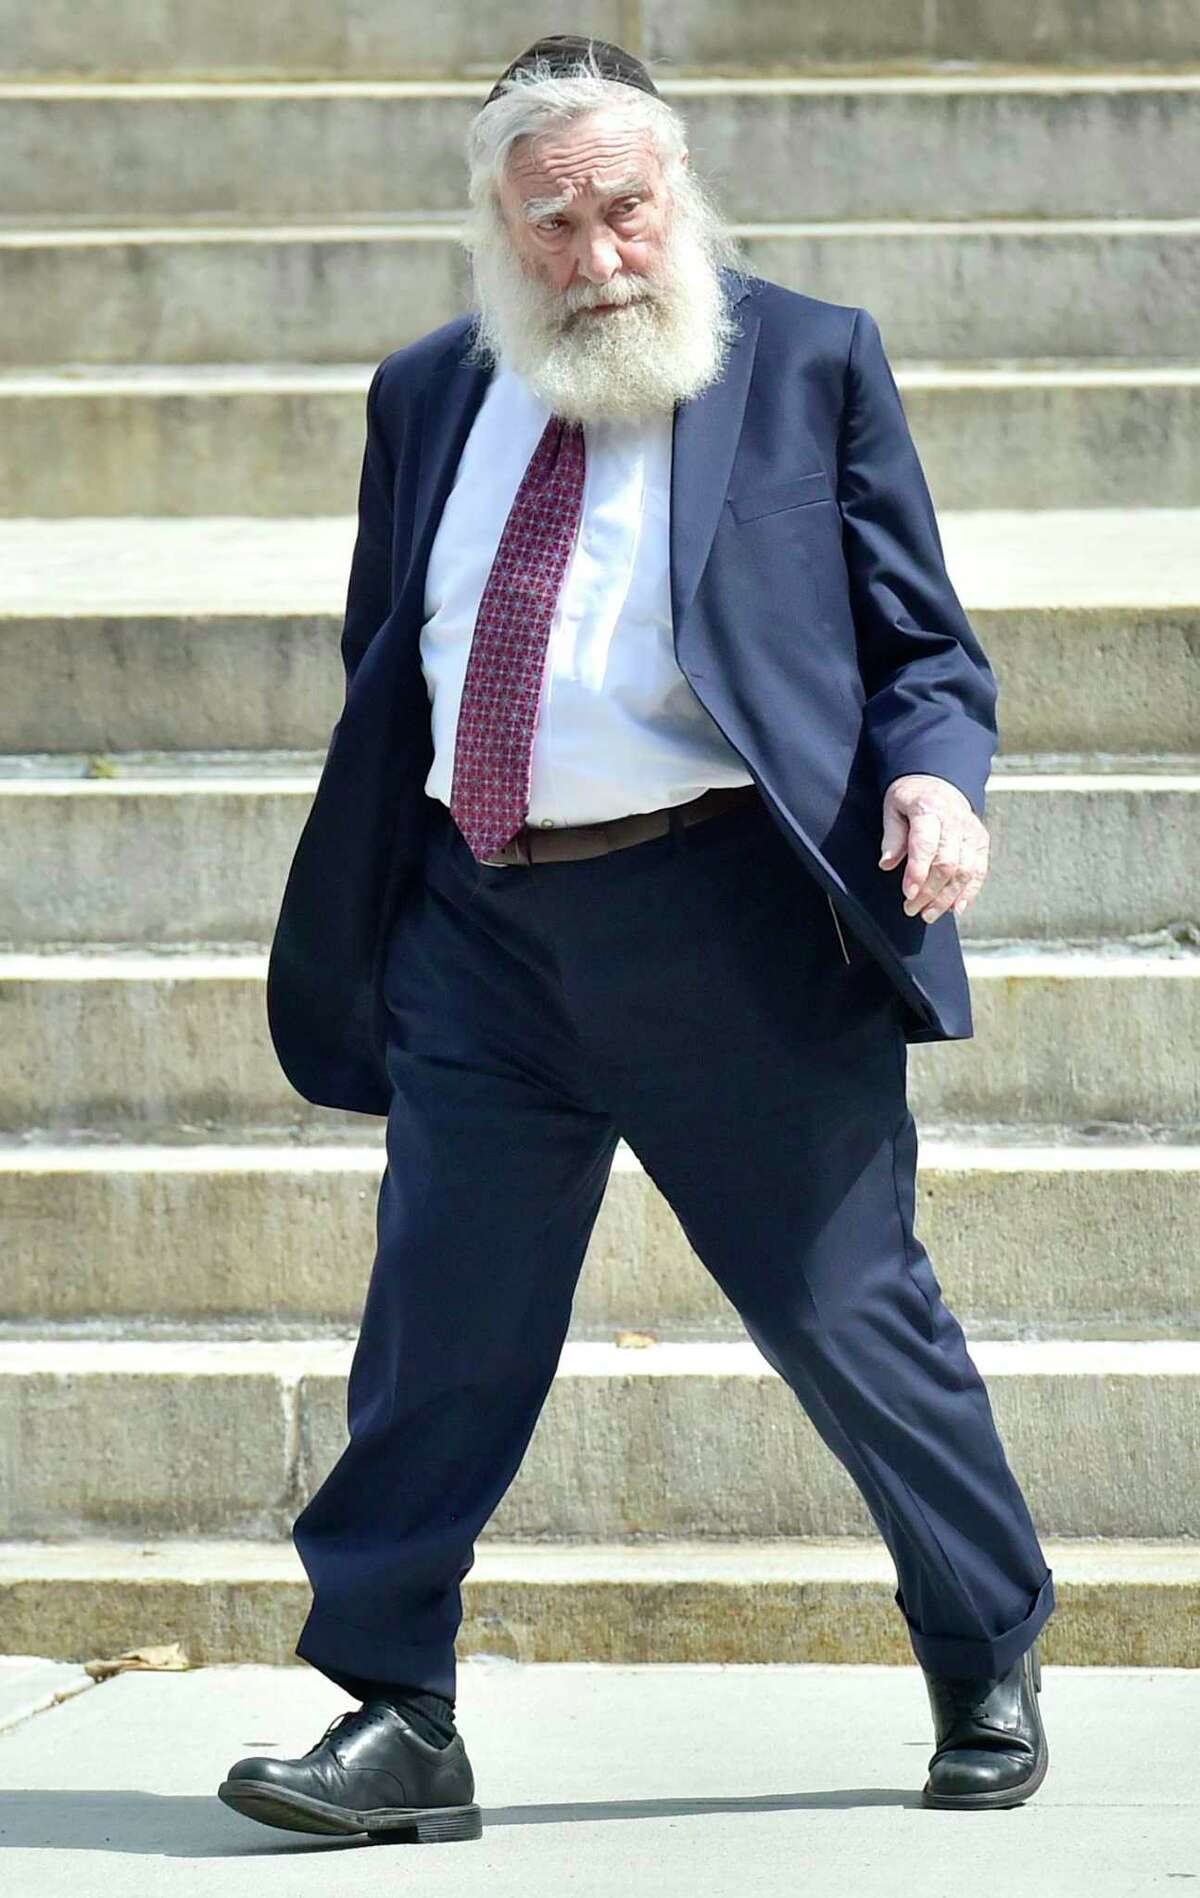 Rabbi Daniel Greer, 77, of New Haven, leaves New Haven Superior Court on Elm Street in New Haven, Conn. Monday, August 14, 2017 after he was arraigned on a criminal charge of second-degree sexual assault and risk of injury to a minor. Greer did not enter a plea. The alleged victim in the criminal charge is Eliyahu Mirlis, of New Jersey, who was awarded $15 million in in his civil lawsuit against Greer in May of 2016. Greer was a dean of the Yeshiva of New Haven/the Gan School, where the alleged victim was a high school student. Greer was accused in May 2016 of repeatedly sexually assaulting Mirlis, of New Jersey, over several years in the early- to mid-2000s. Mirlis attended the school from 2001 to 2005. Greer has denied the allegations.